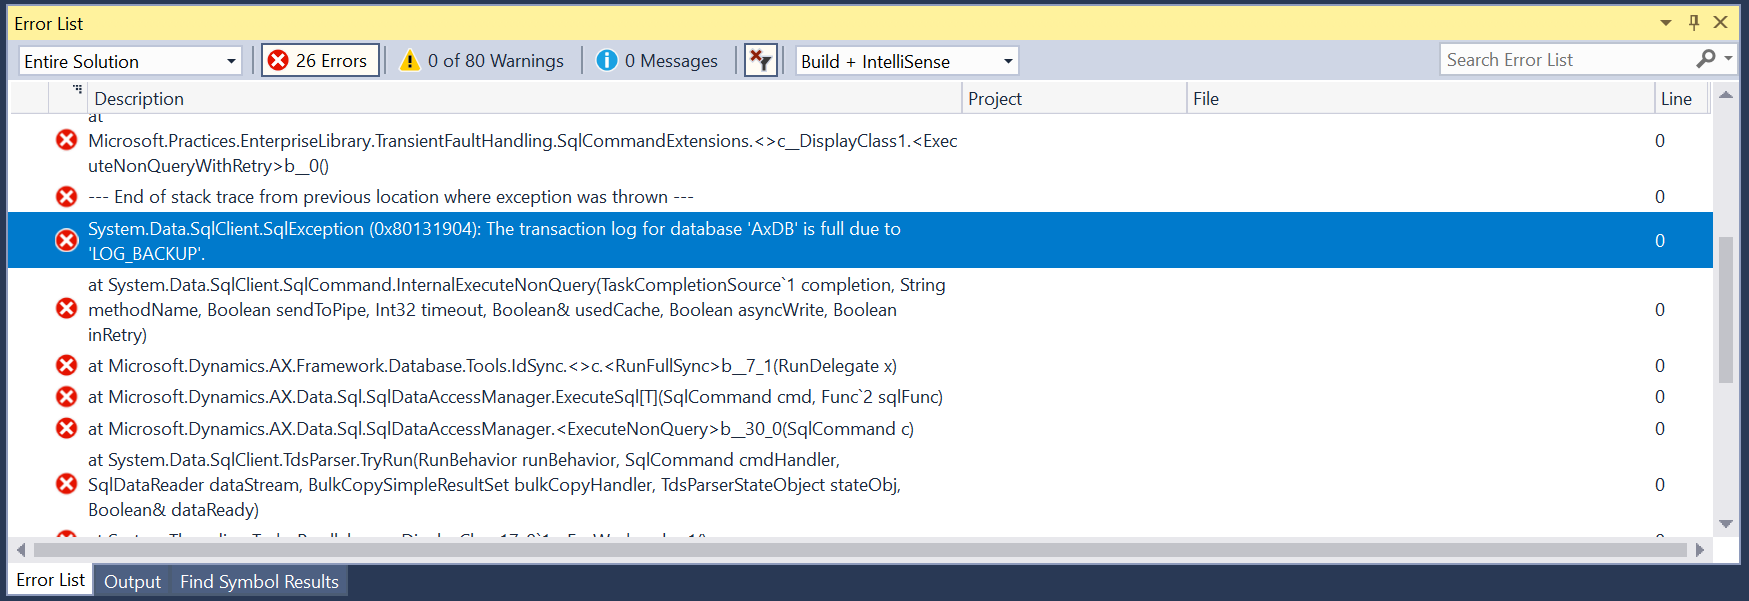 System.Data.SqlClient.SqlException (0x80131904): The transaction log for database 'AxDB' is full due to 'LOG_BACKUP'.